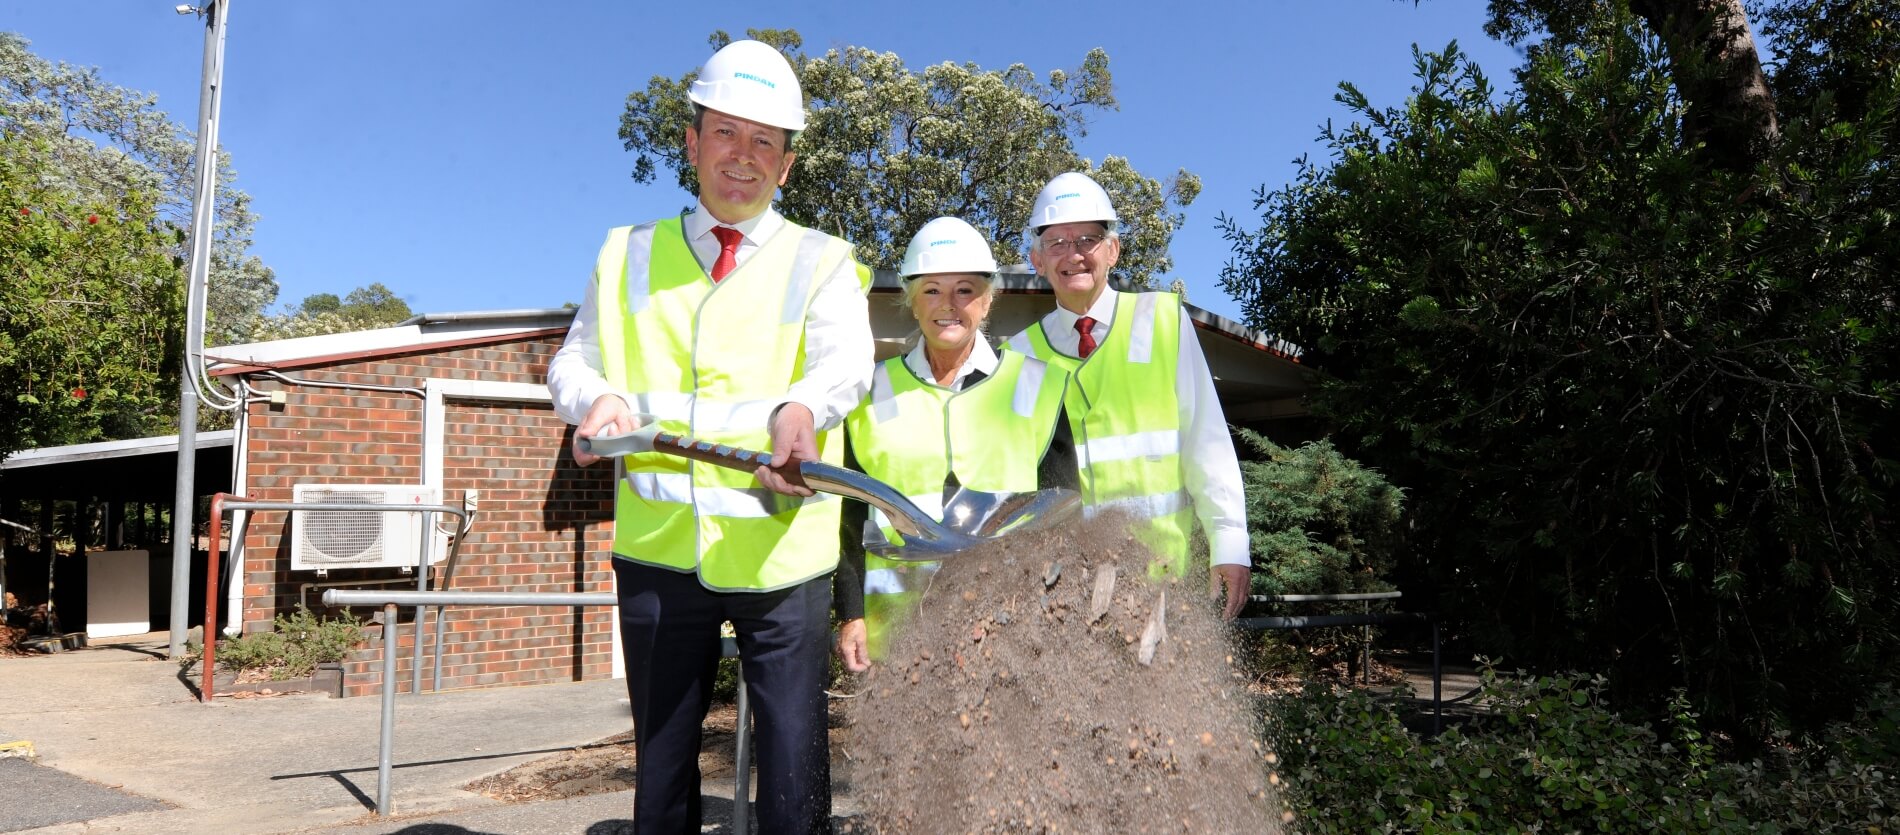 From left Premier Mark McGowan joined with City of Kalamunda Mayor Margaret Thomas, local MP Mathew Hughes. Mark McGown is tipping dirt off the shove he is holding. 